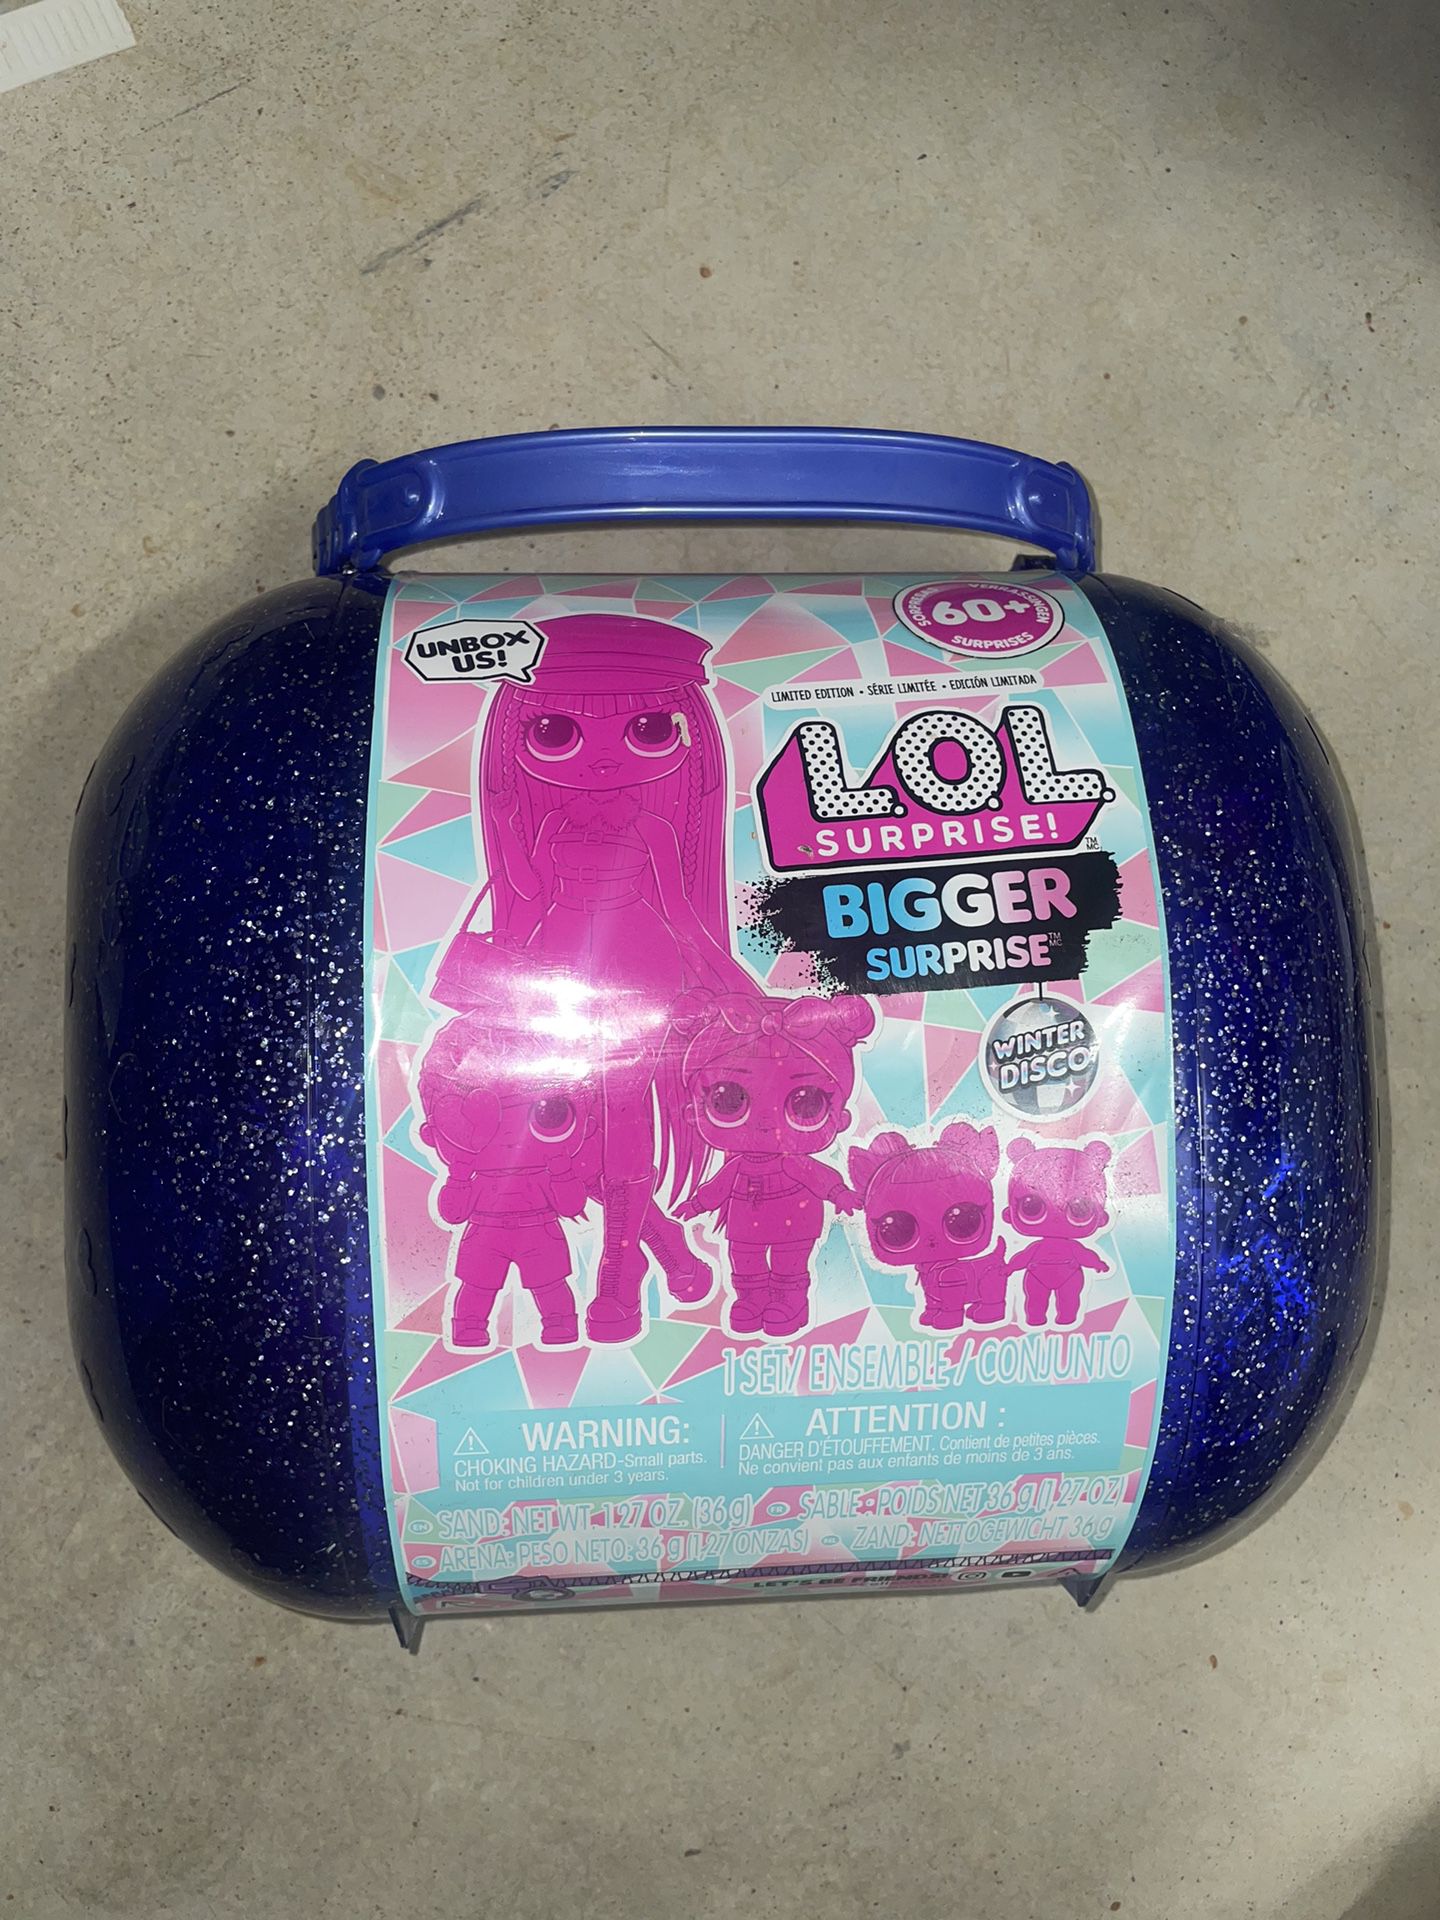 Lol Doll: BIGGER SURPRISE (Limited Edition)